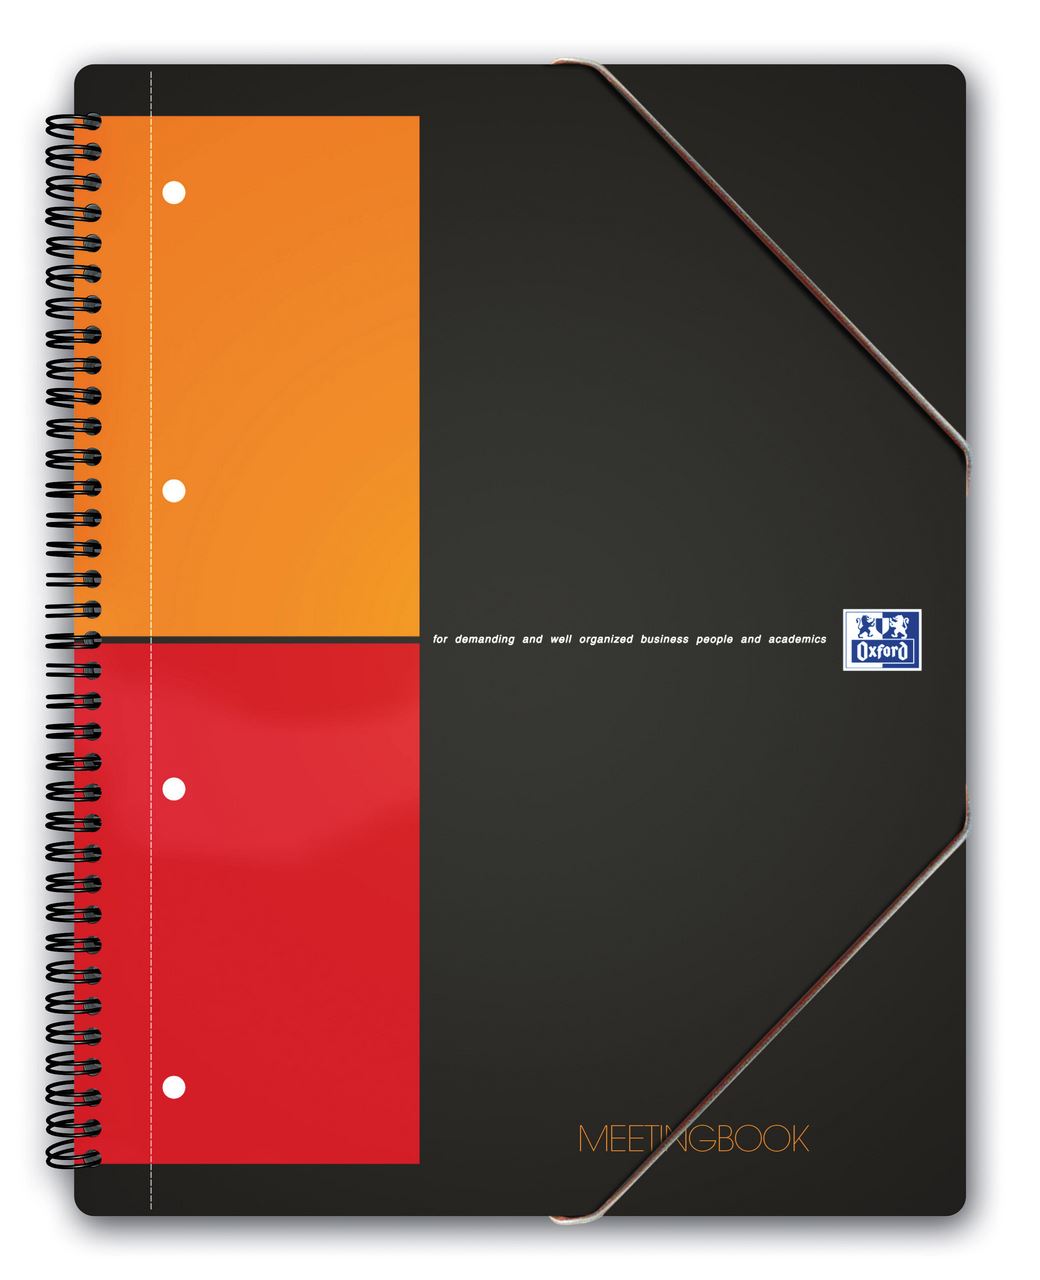 Cahier A4 Meetingbook 160 pages